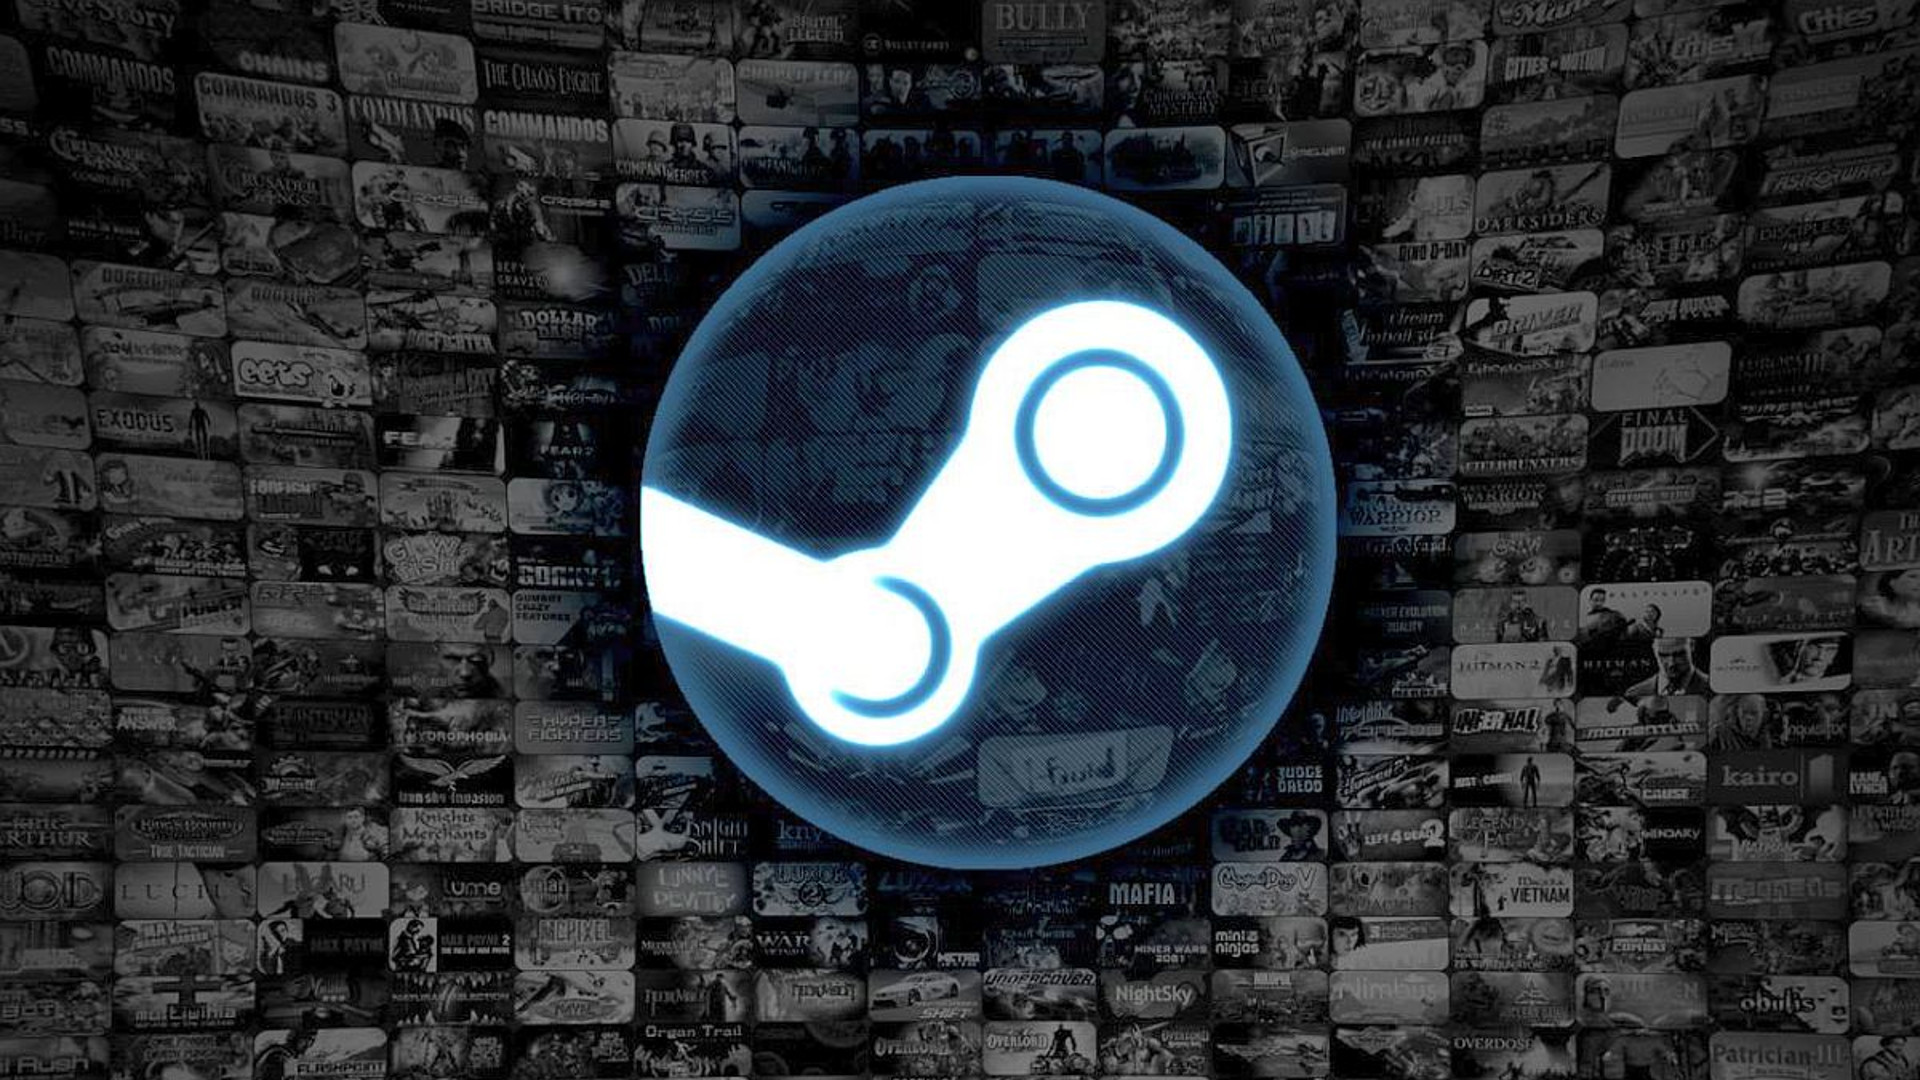 Steam adds more restrictions to prevent regional price abuse